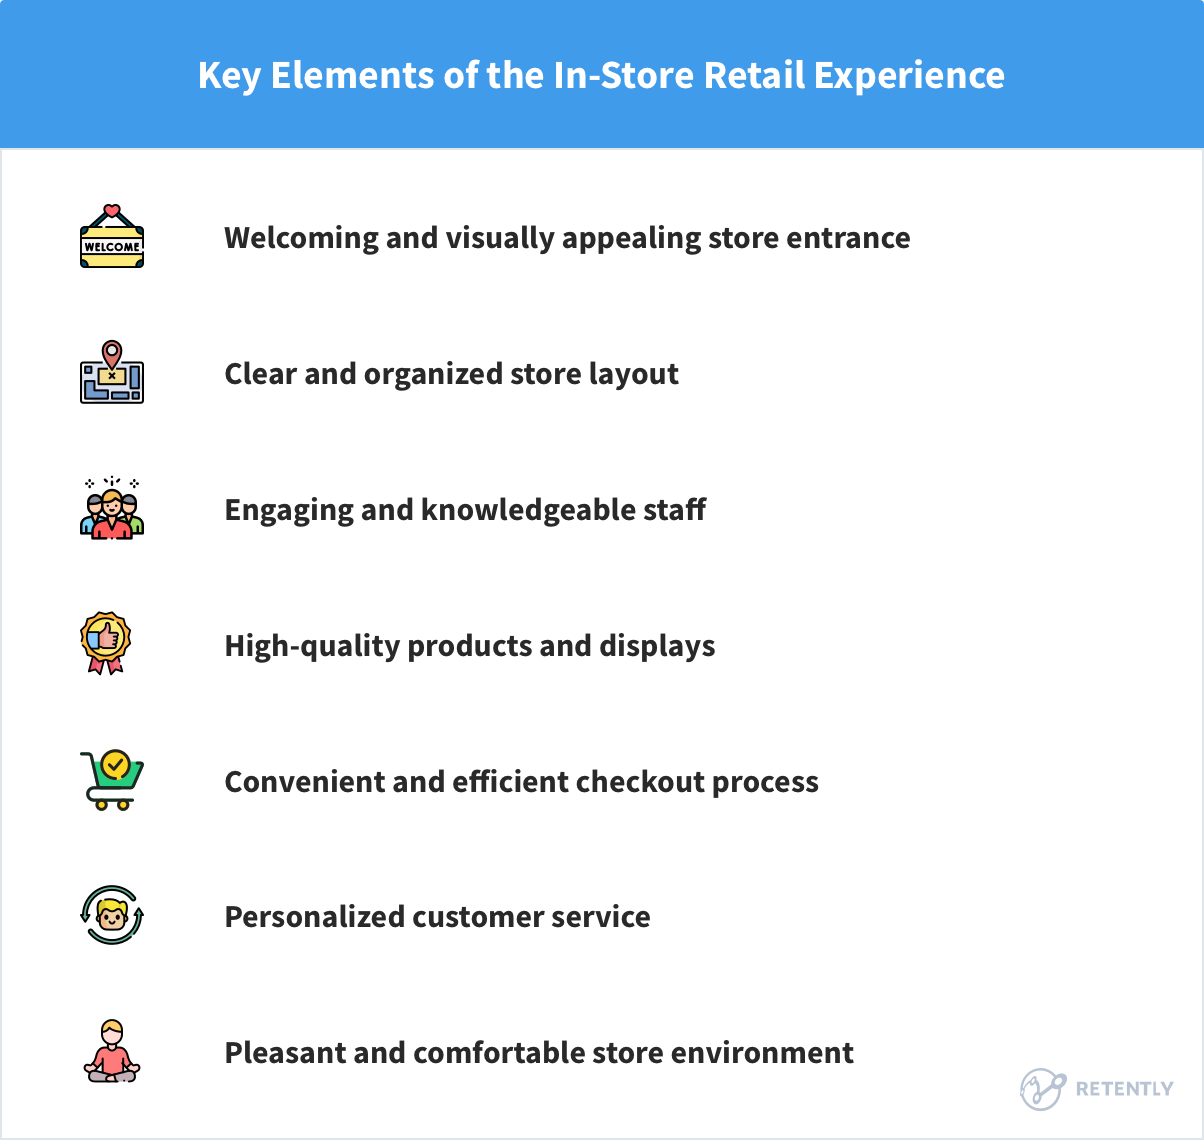 Key Elements of the In-Store Retail Customer Experience